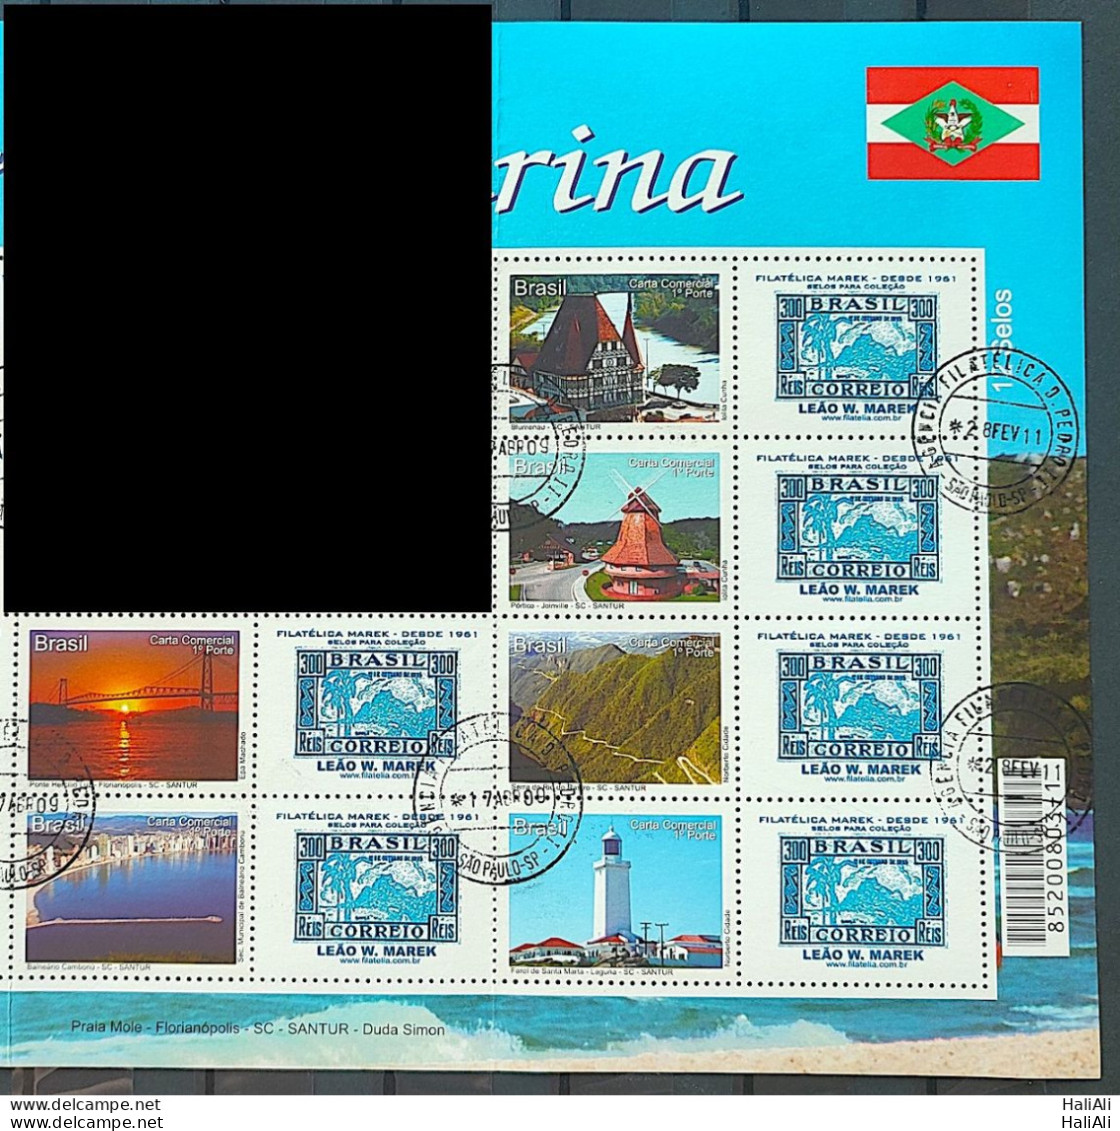 C 2783 Brazil Personalized Stamp Santa Catarina 2009 CPD SP Right Side Od The Sheet Very Rare - Gepersonaliseerde Postzegels